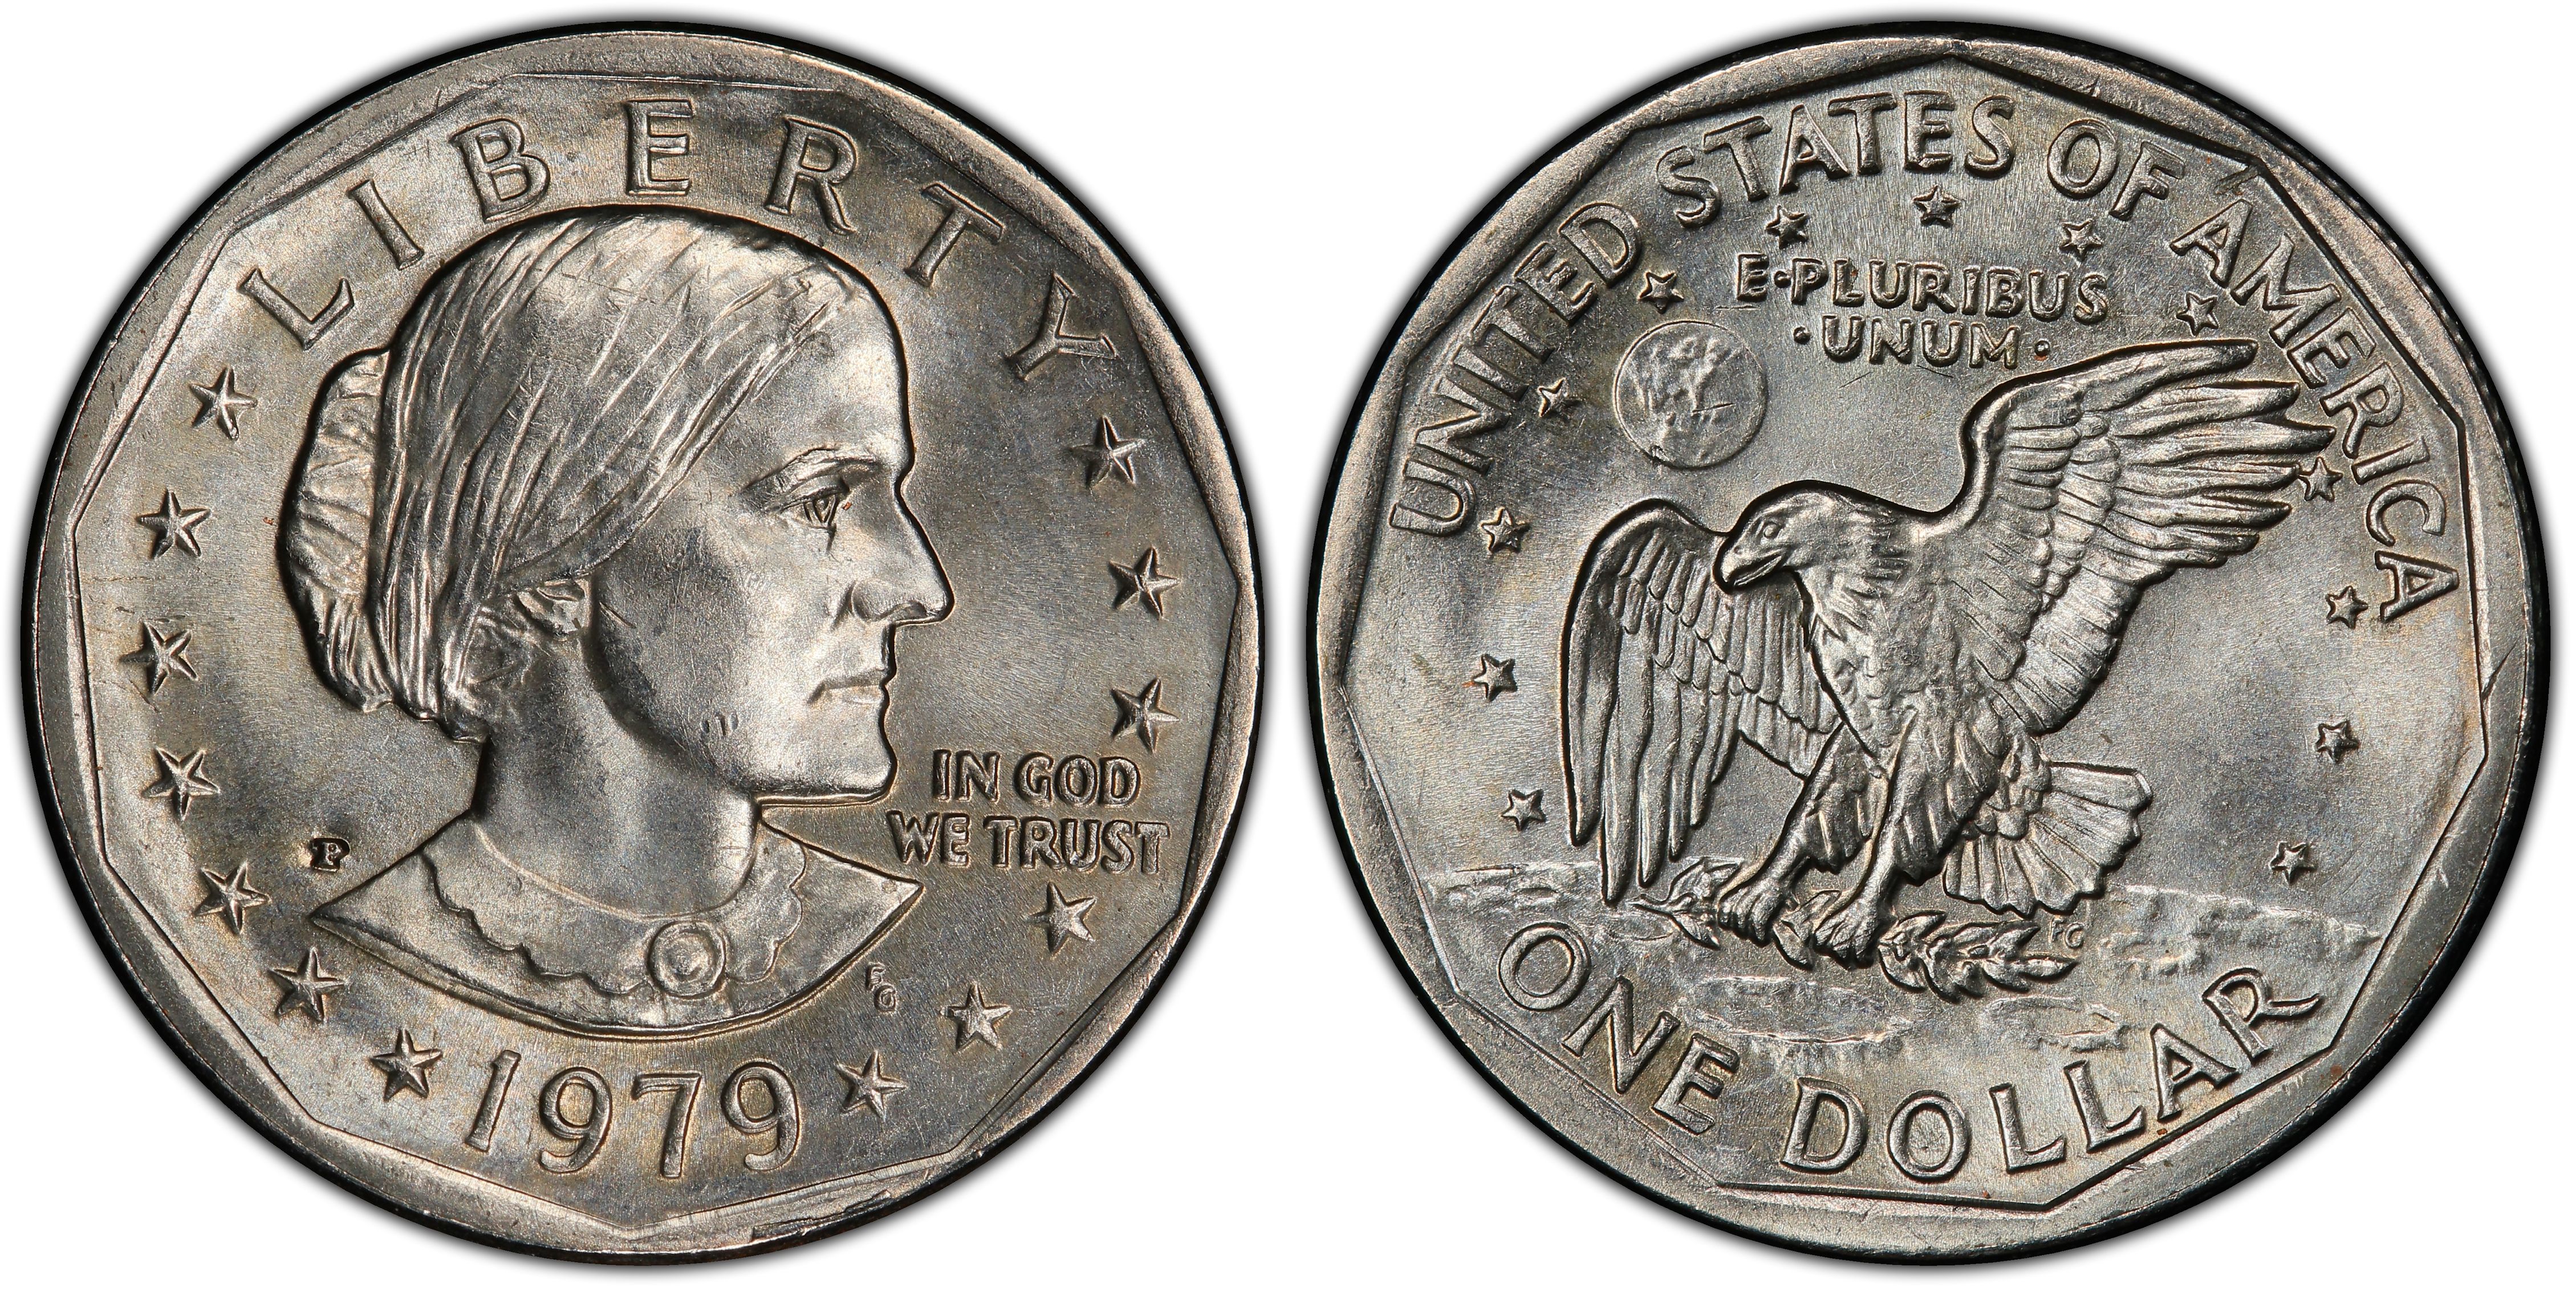 Images of Susan B. Anthony Dollar 1979-P SBA$1 - PCGS CoinFacts4518 x 2280